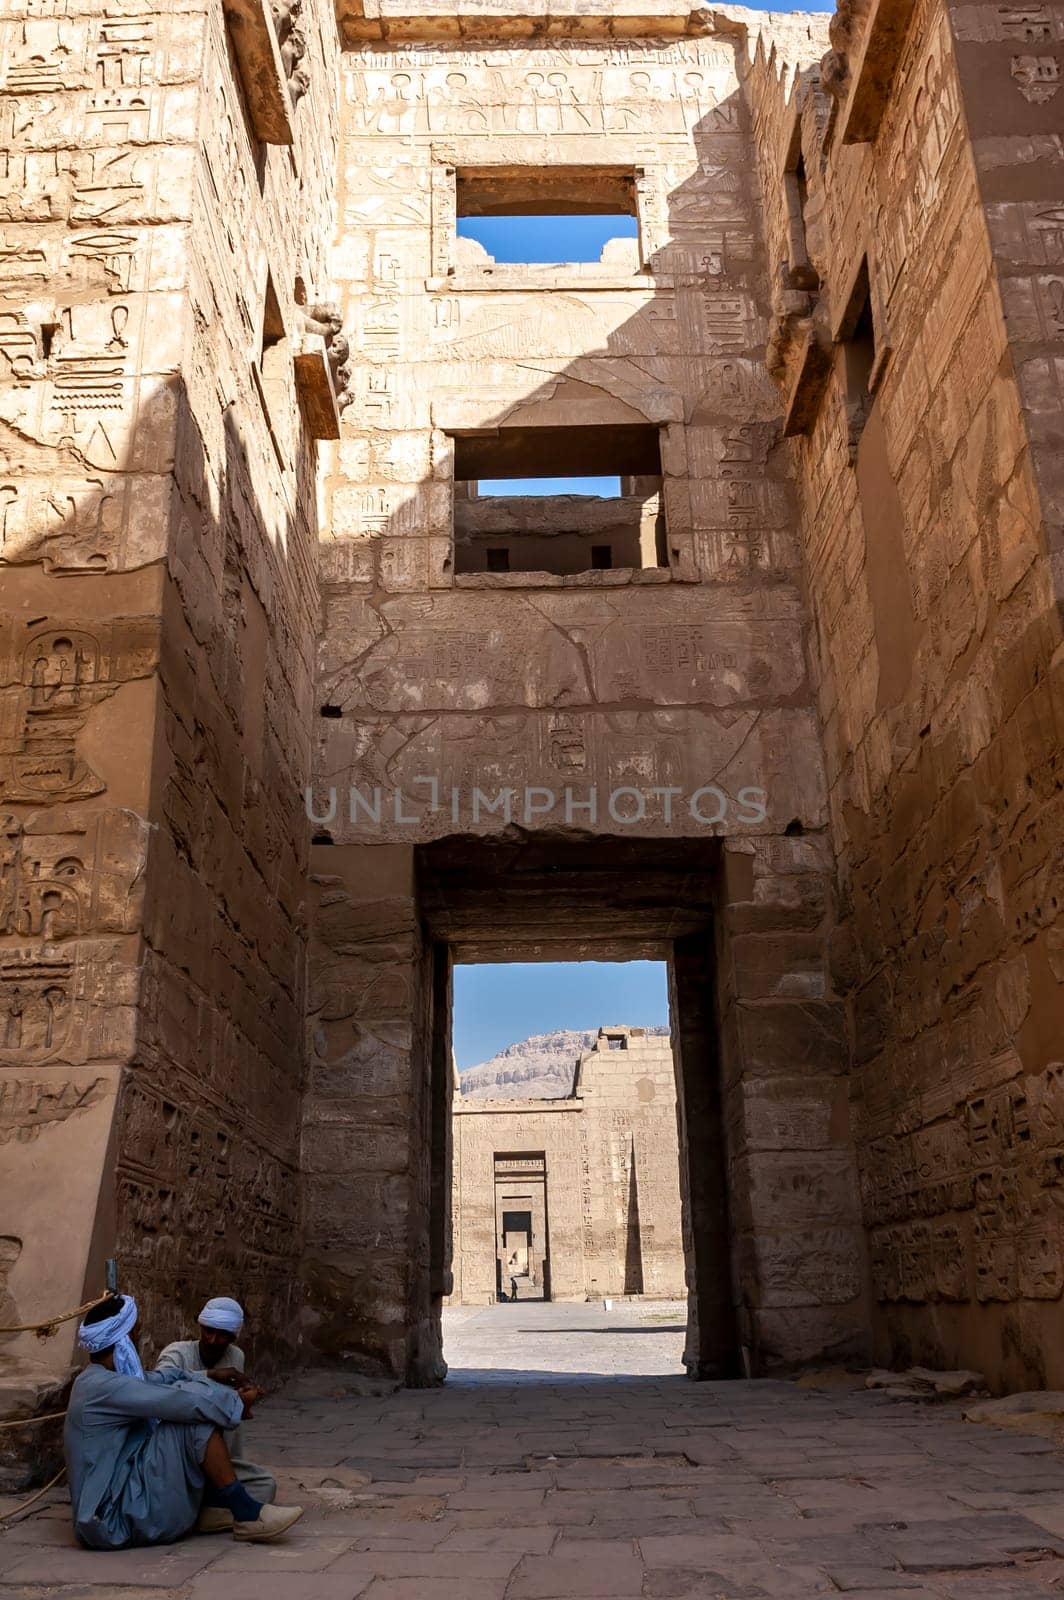 Luxor, Egypt - April 16 2008: The funerary temple of Ramses II in the archaeological site of Medinet Habu, Luxor, Egypt